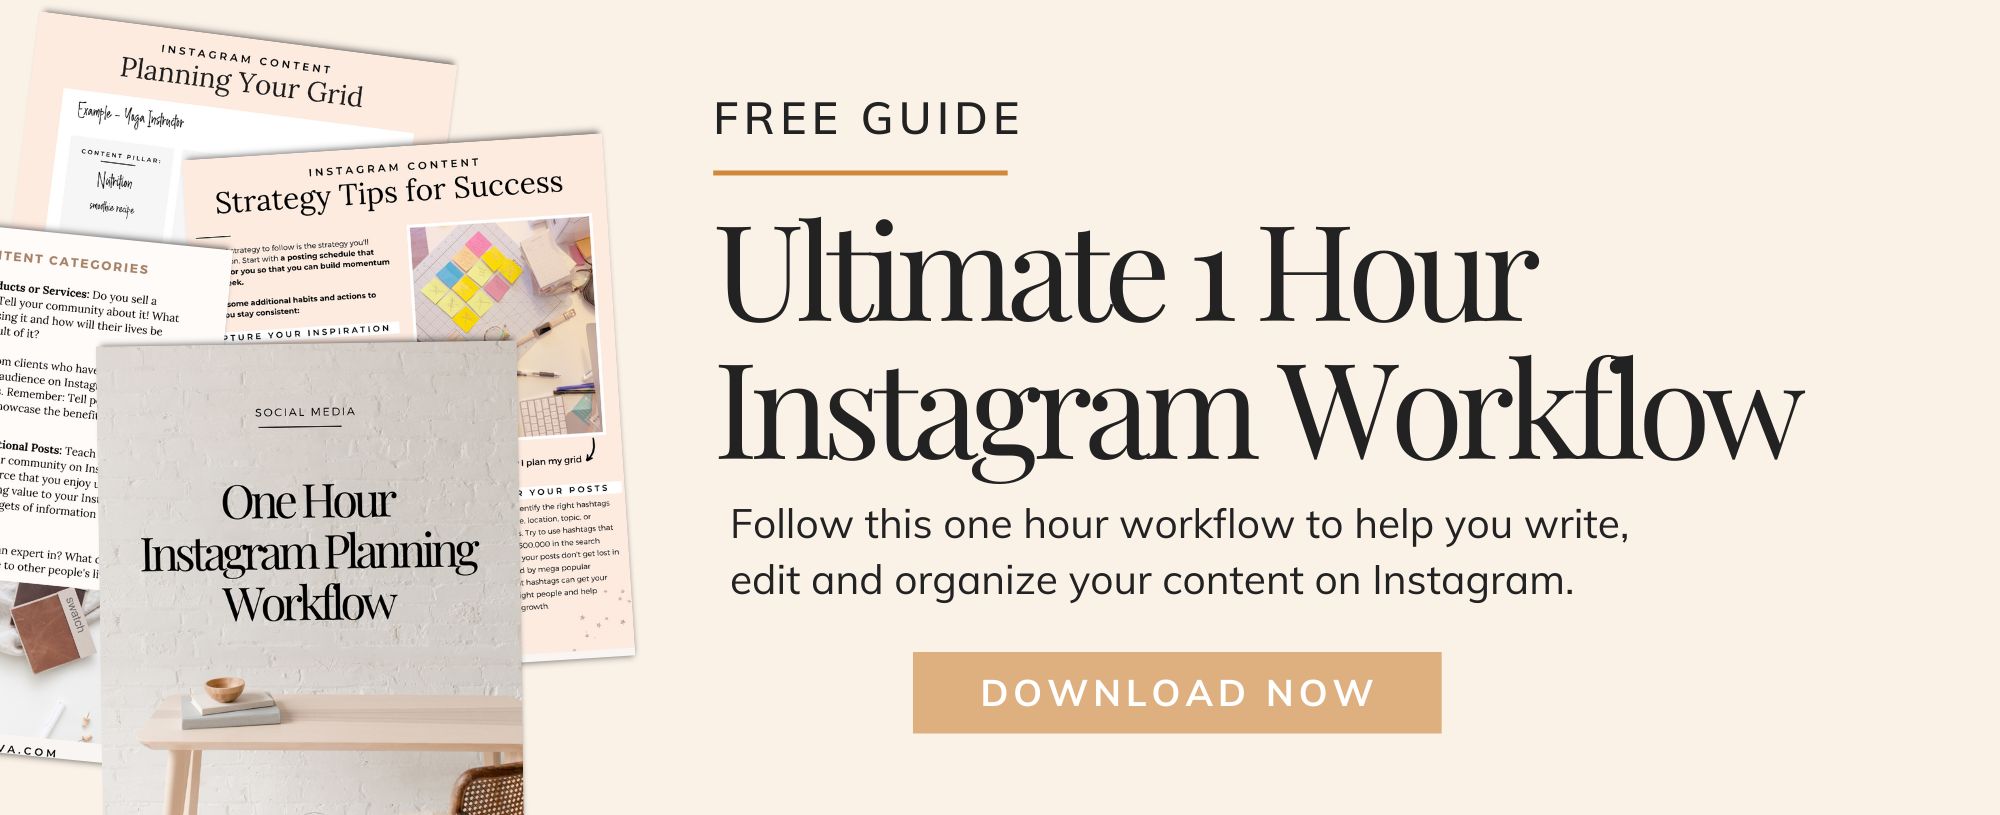 Follow this one hour workflow to help you write, edit and organize your content on Instagram